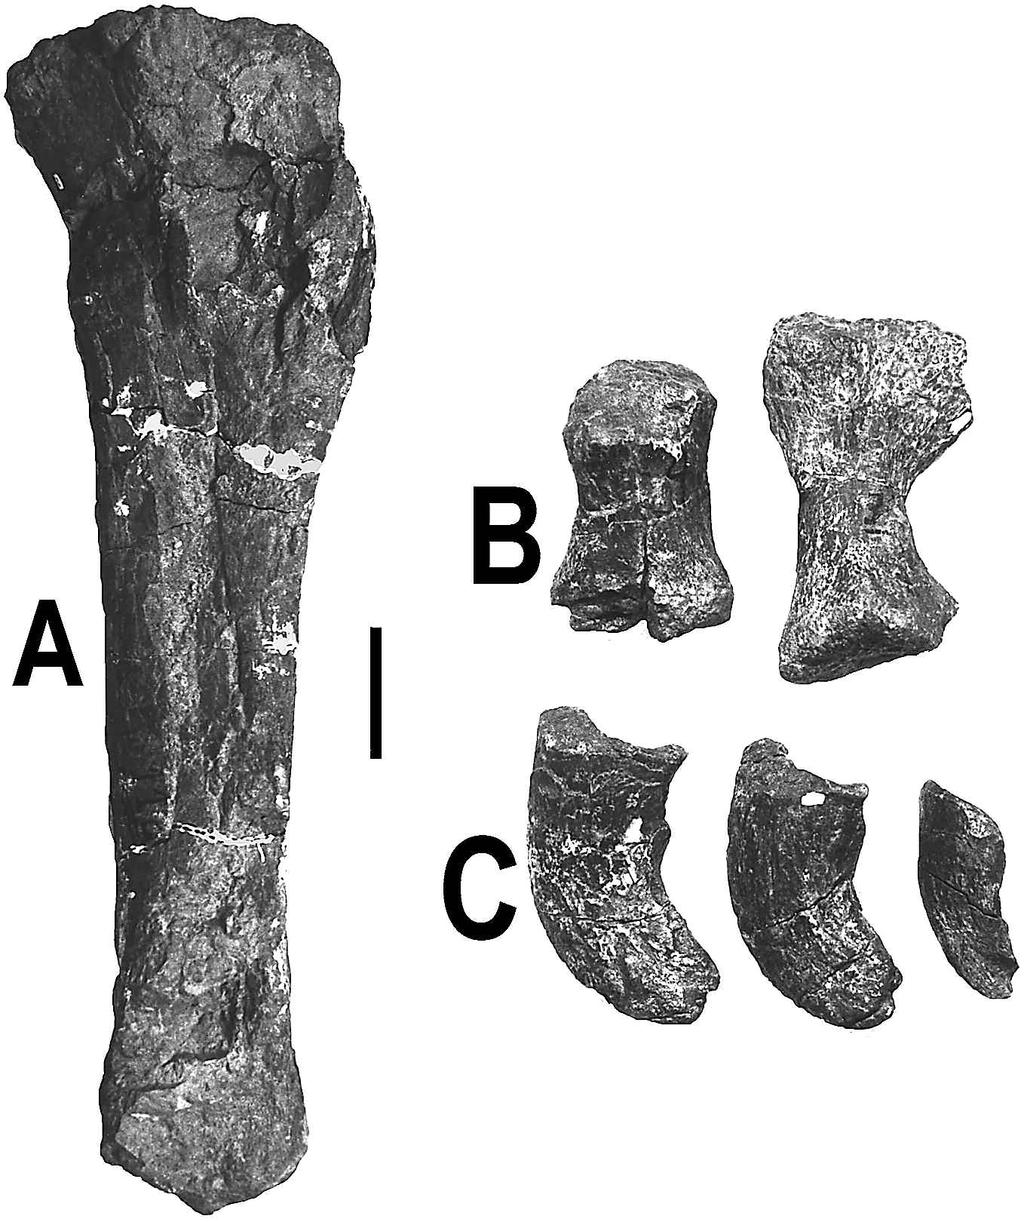 Only the proximal end of the left femur is preserved. The head is set distinctly higher than the sharply defined greater trocanter, as it is in Brachiosaurus (fig. 10 A).